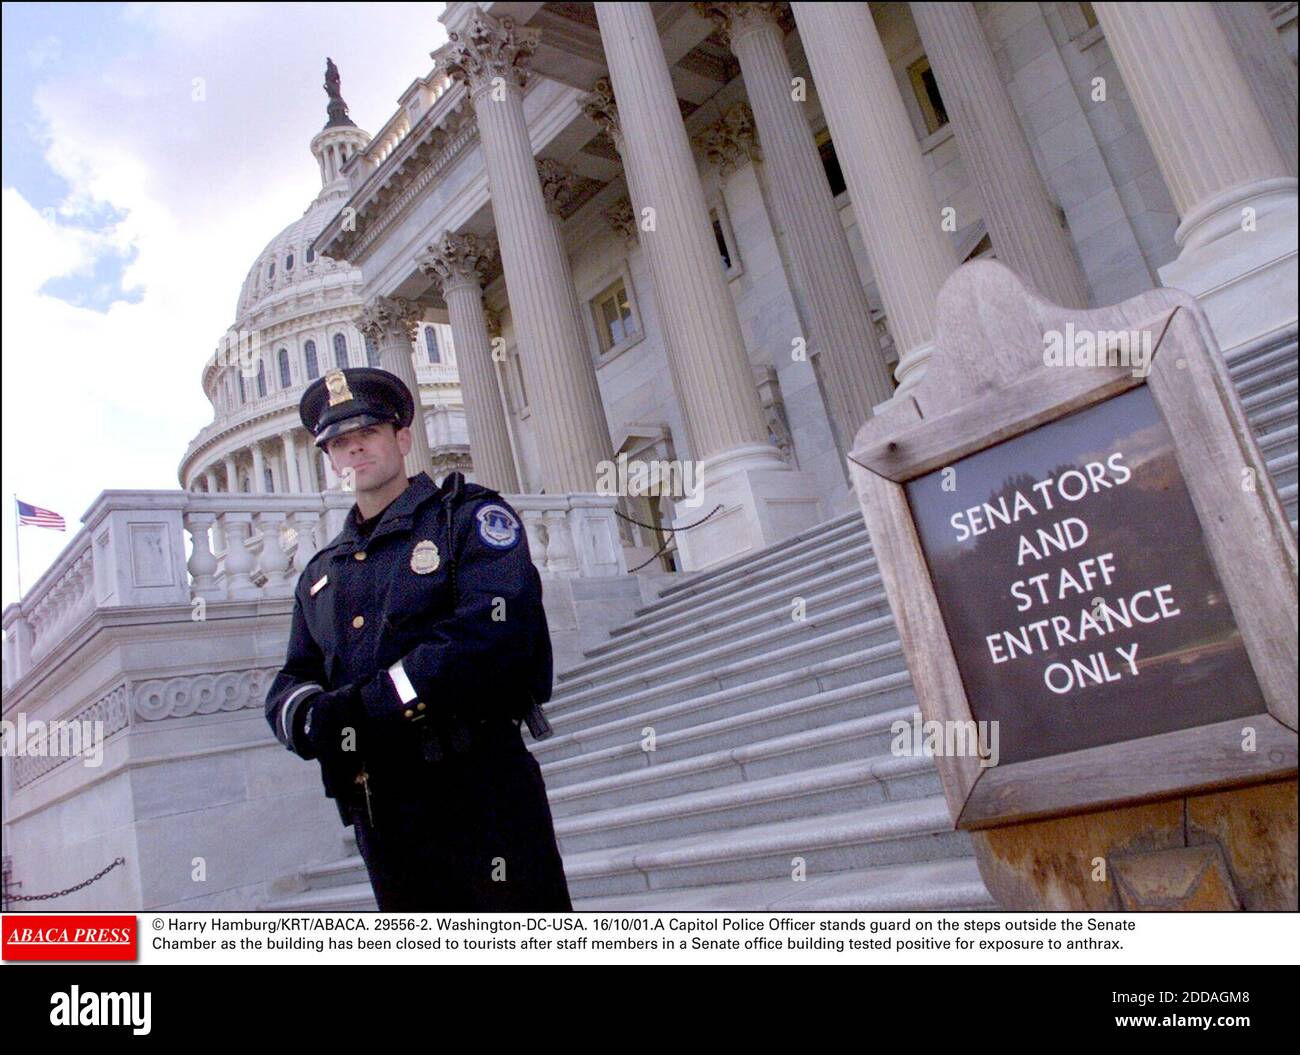 NO FILM, NO VIDEO, NO TV, NO DOCUMENTARY - © Harry Hamburg/KRT/ABACA. 29556-2. Washington-DC-USA. 16/10/01.A Capitol Police Officer stands guard on the steps outside the Senate Chamber as the building has been closed to tourists after staff members in a Senate office building tested positive for e Stock Photo